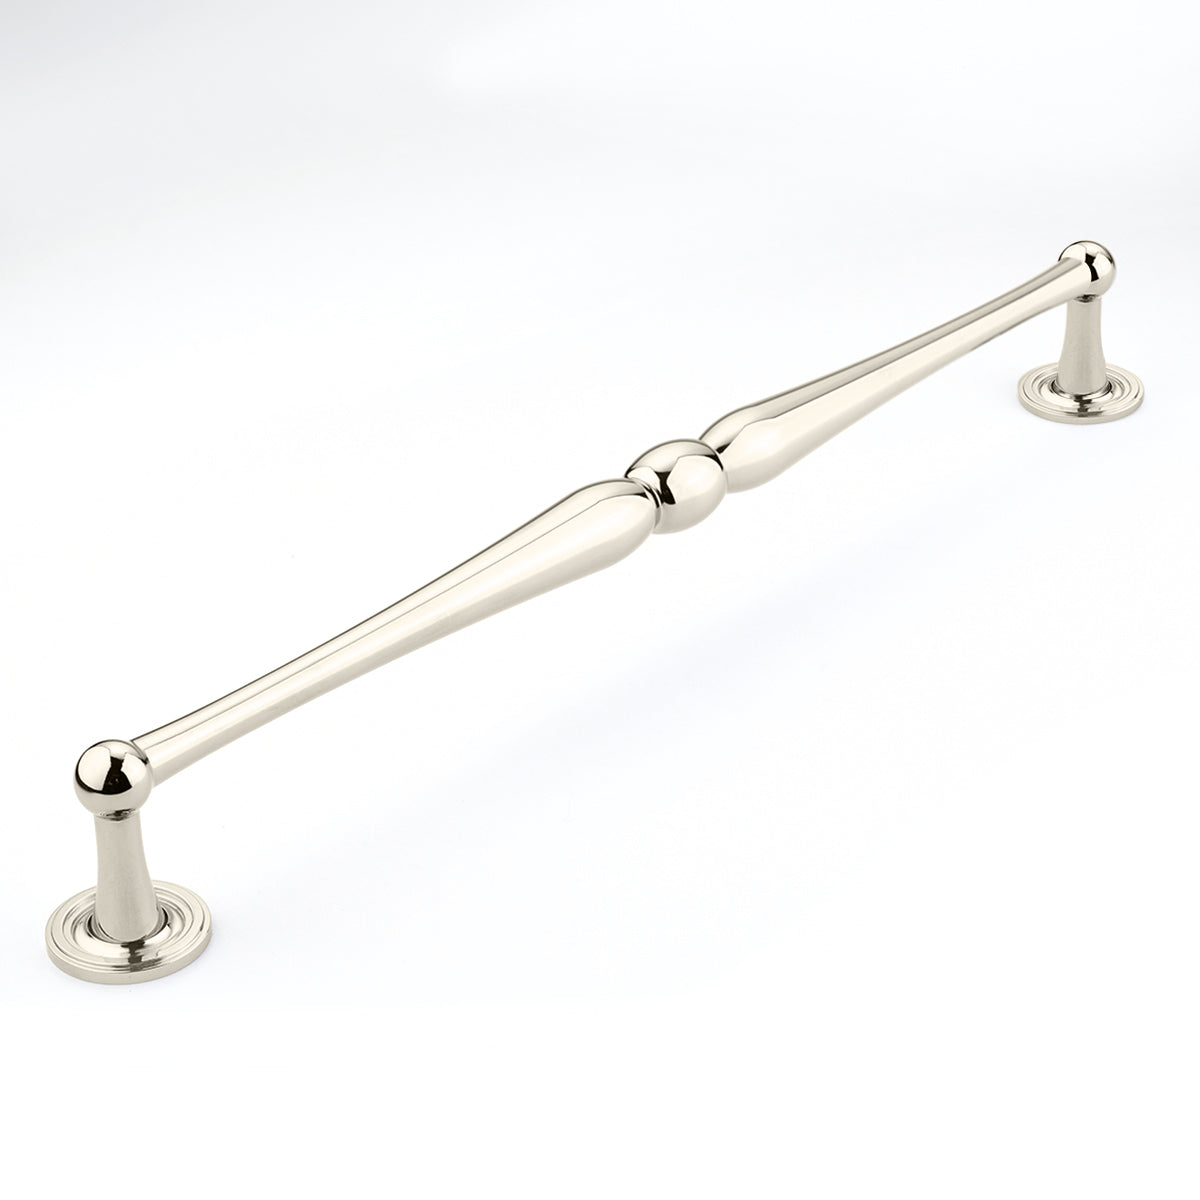 15 3/4 Inch (15 Inch c-c) Atherton Pull with Plain Footplates (Polished Nickel Finish)